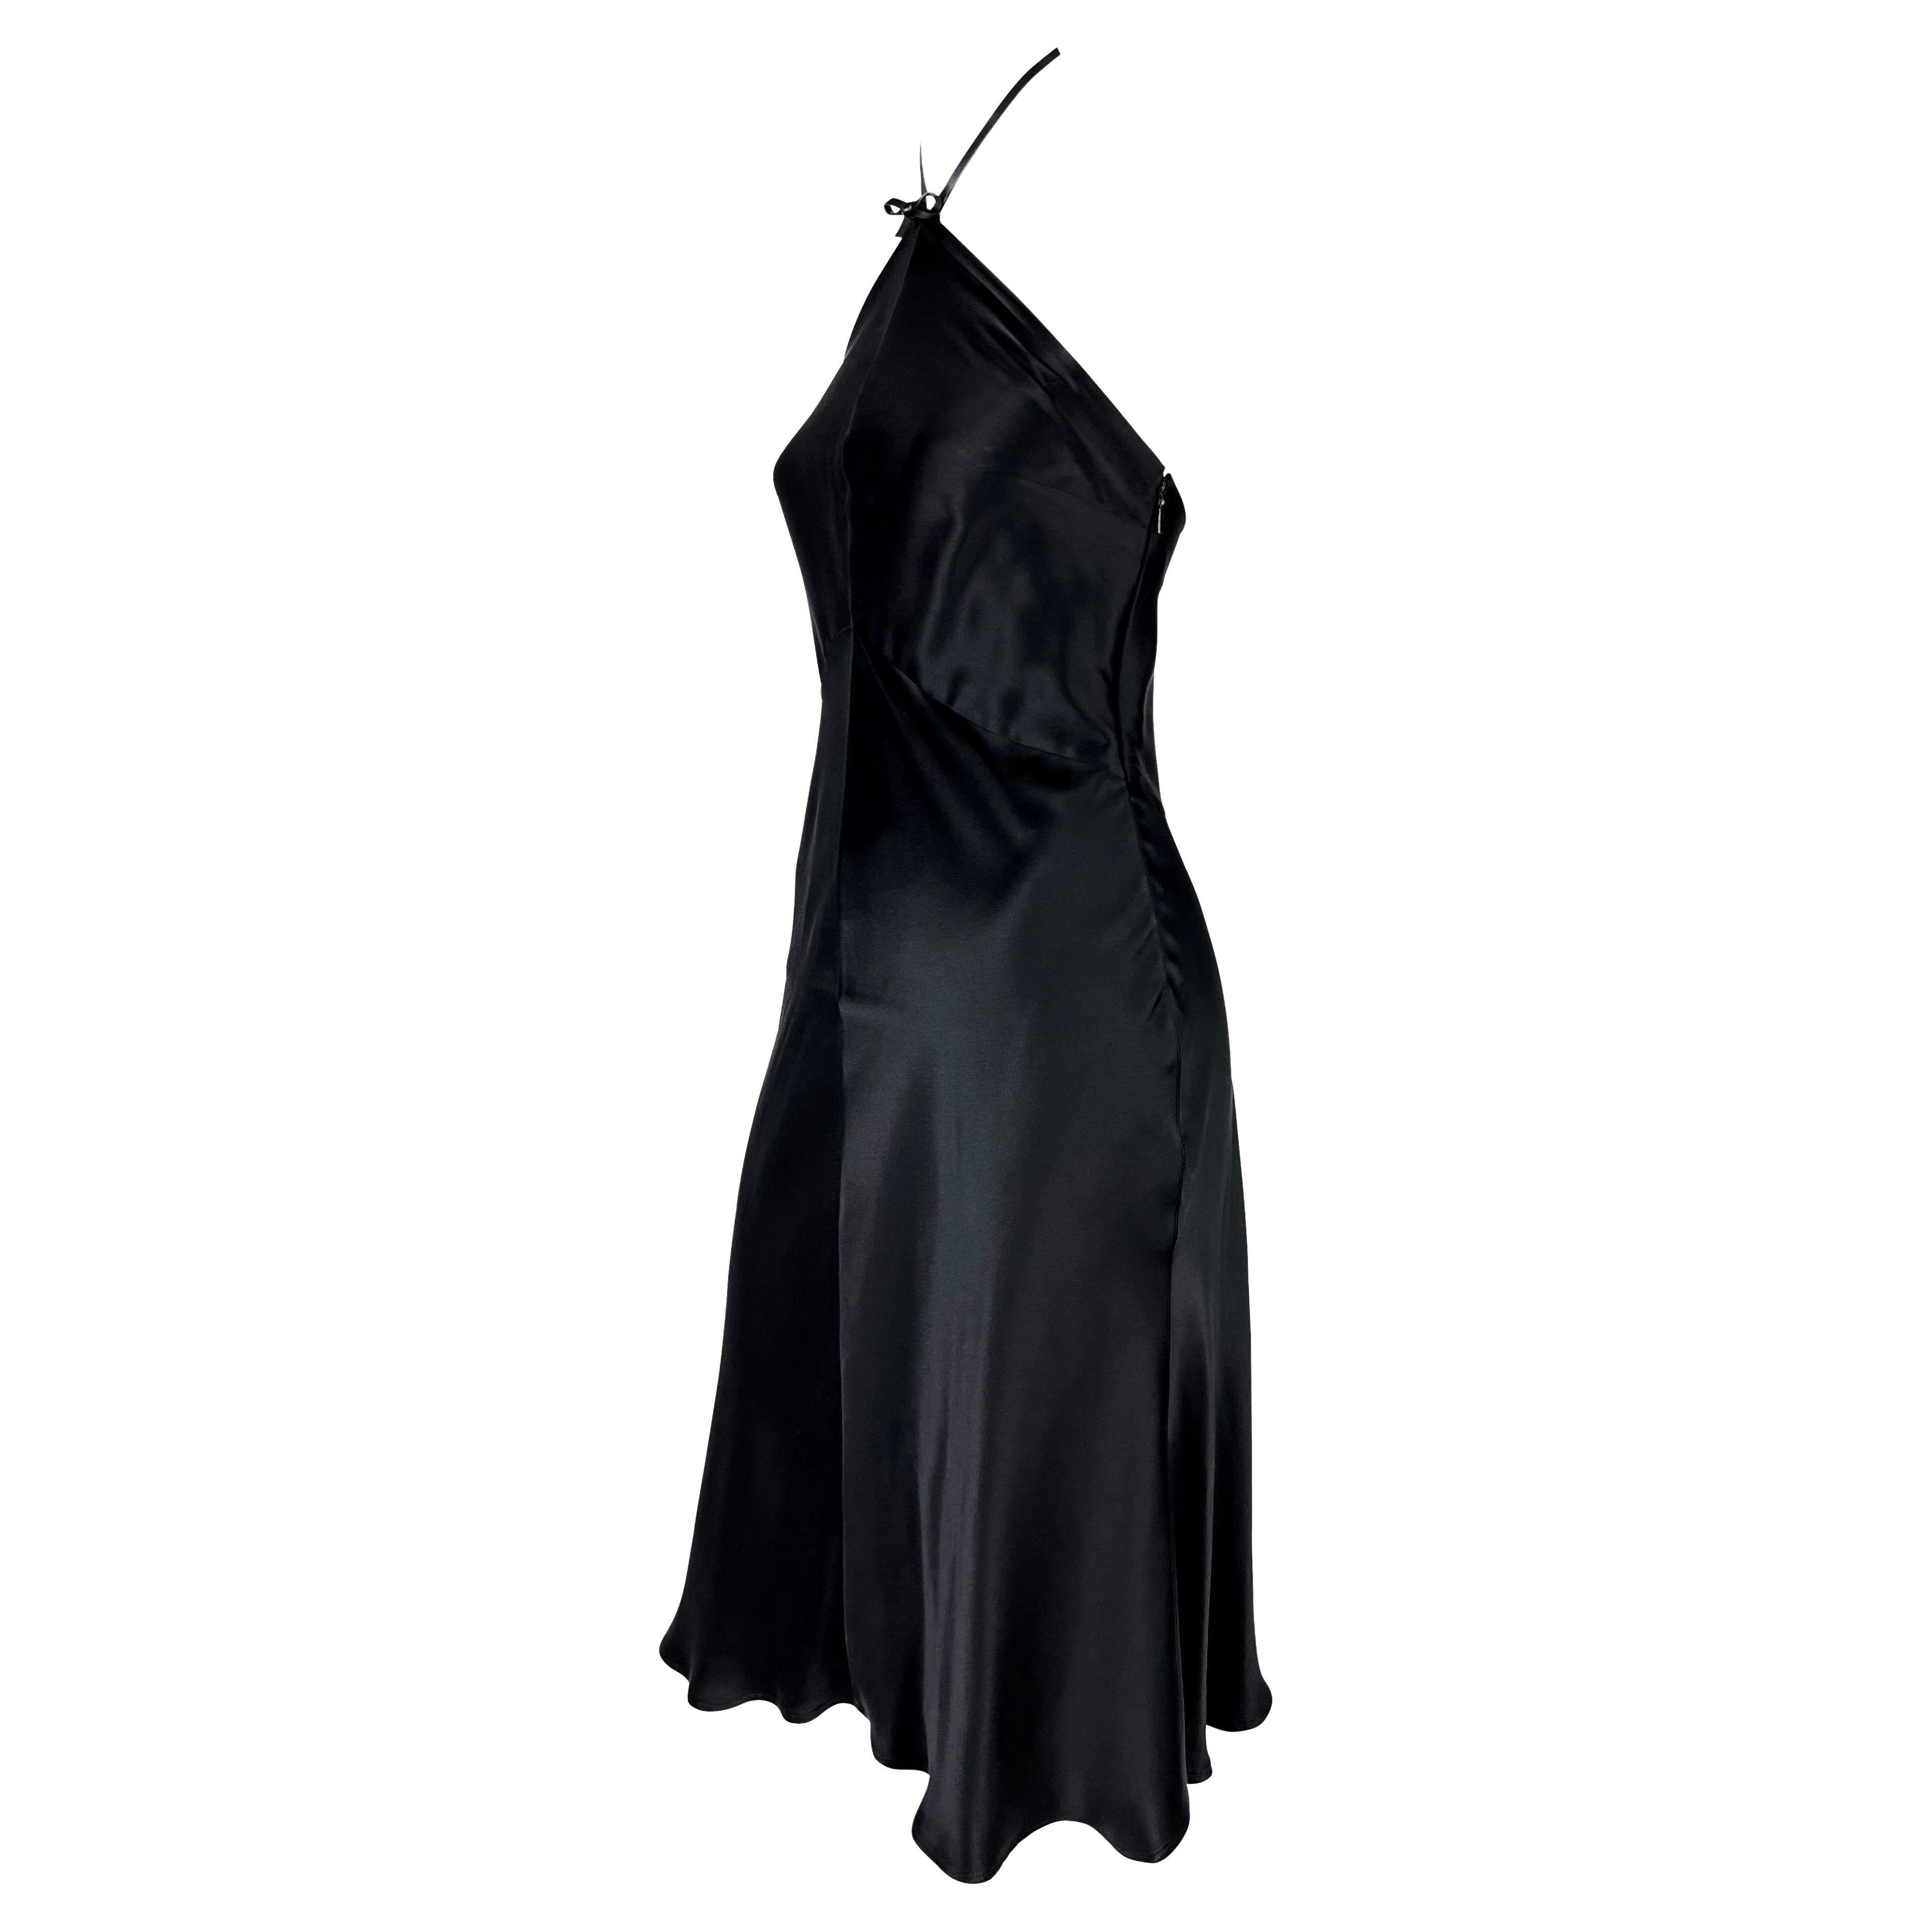 TheRealList presents: a stunning black silk satin Gucci halterneck dress, designed by Tom Ford. From the Spring/Summer 2001 collection, this fabulous dress is constructed entirely of black silk satin with a flare-cut skirt and is made complete with